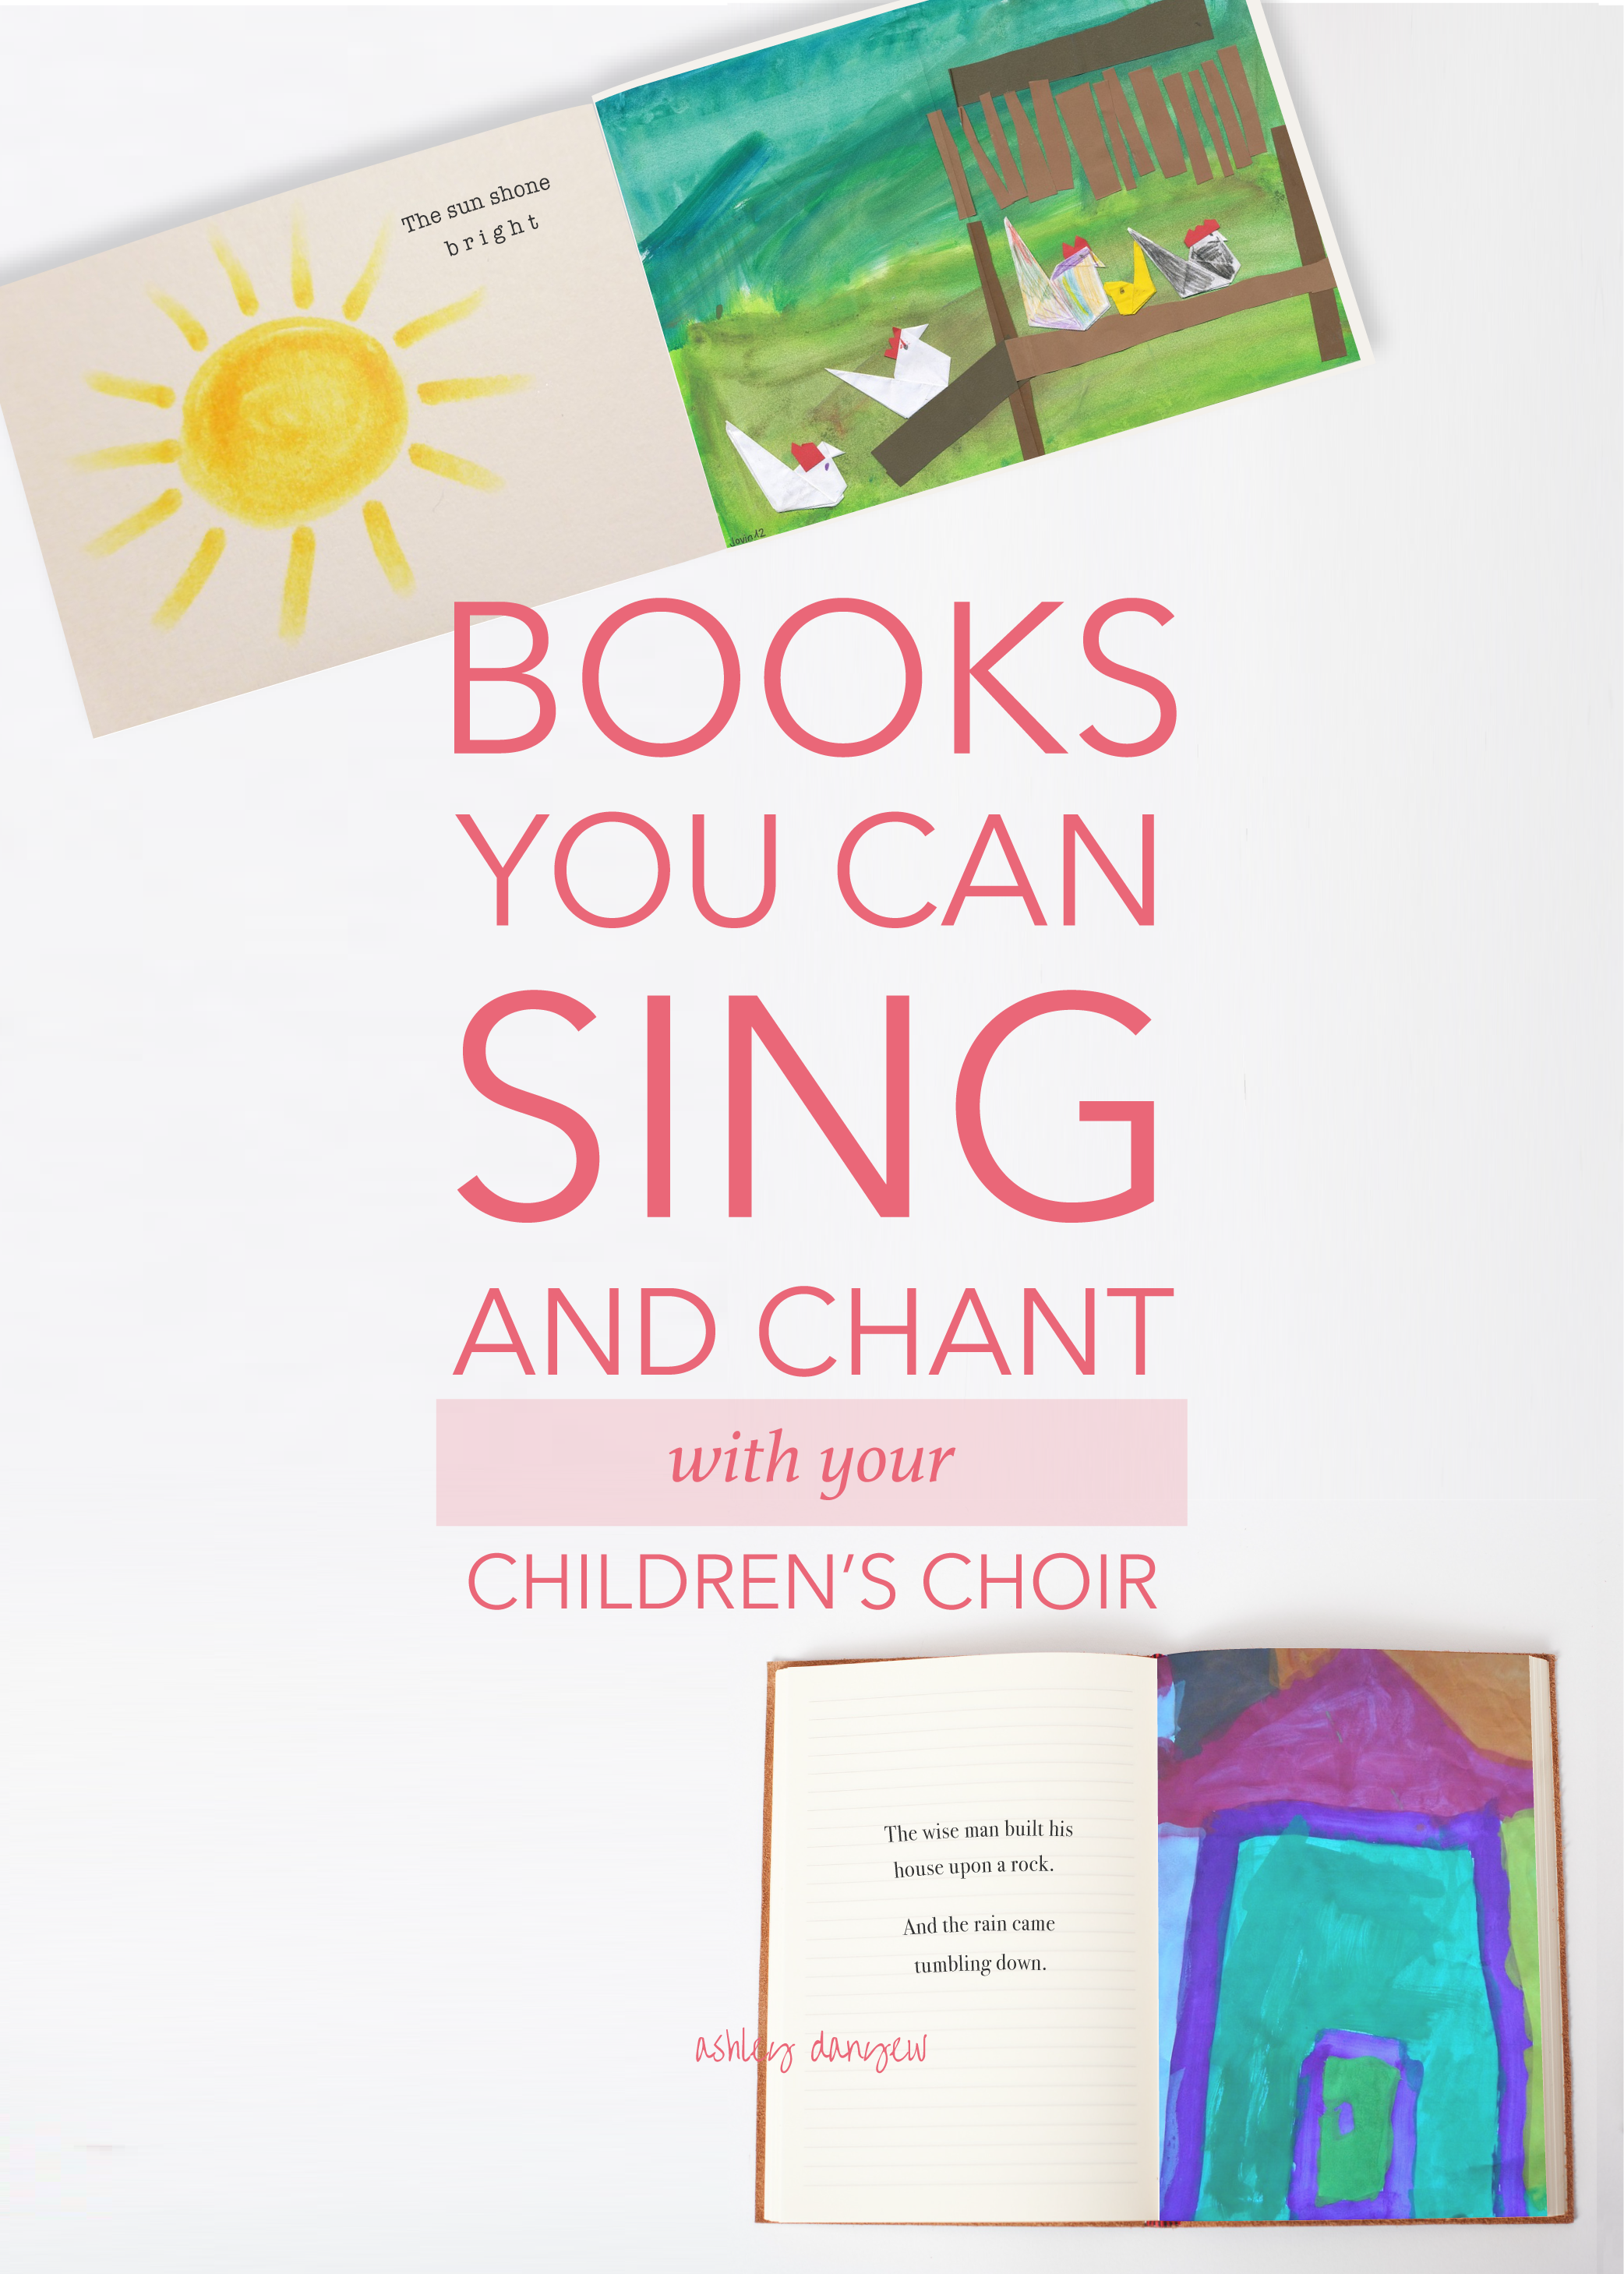 Books You Can Sing and Chant with Your Children's Choir